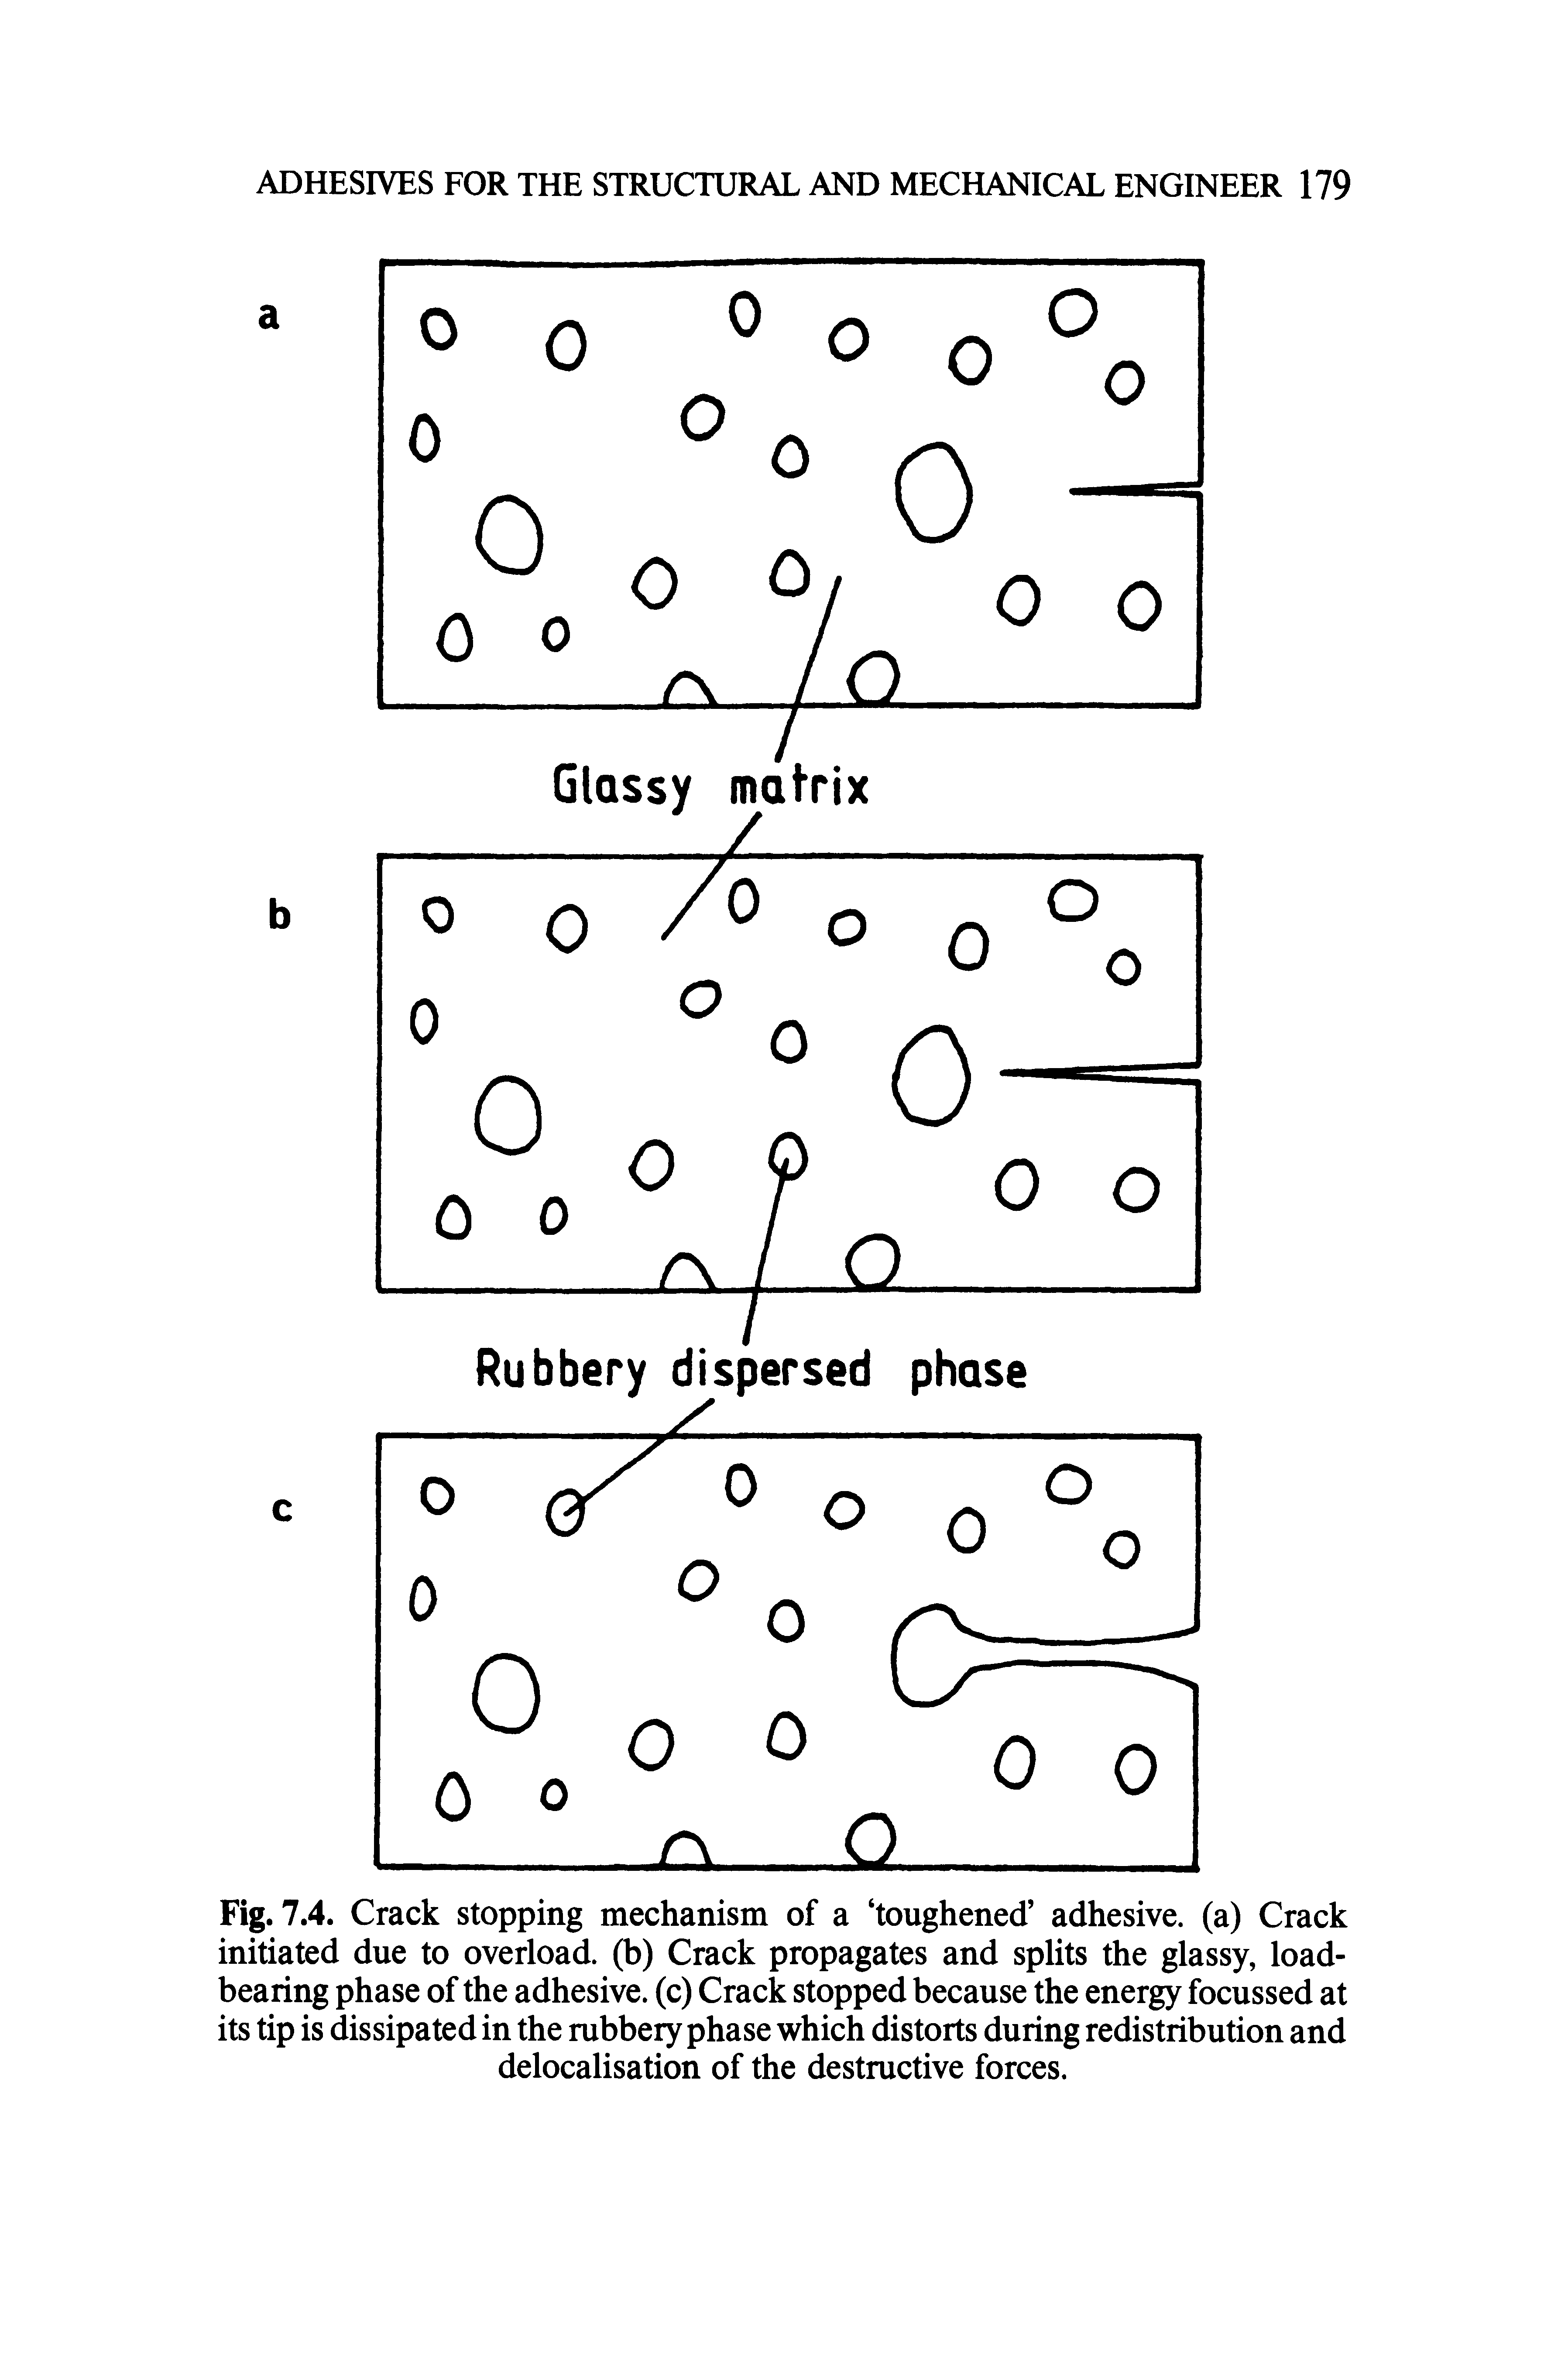 Fig. 7.4. Crack stopping mechanism of a toughened adhesive, (a) Crack initiated due to overload, (b) Crack propagates and splits the glassy, load-bearing phase of the adhesive, (c) Crack stopped because the energy focussed at its tip is dissipated in the rubbery phase which distorts during redistribution and delocalisation of the destructive forces.